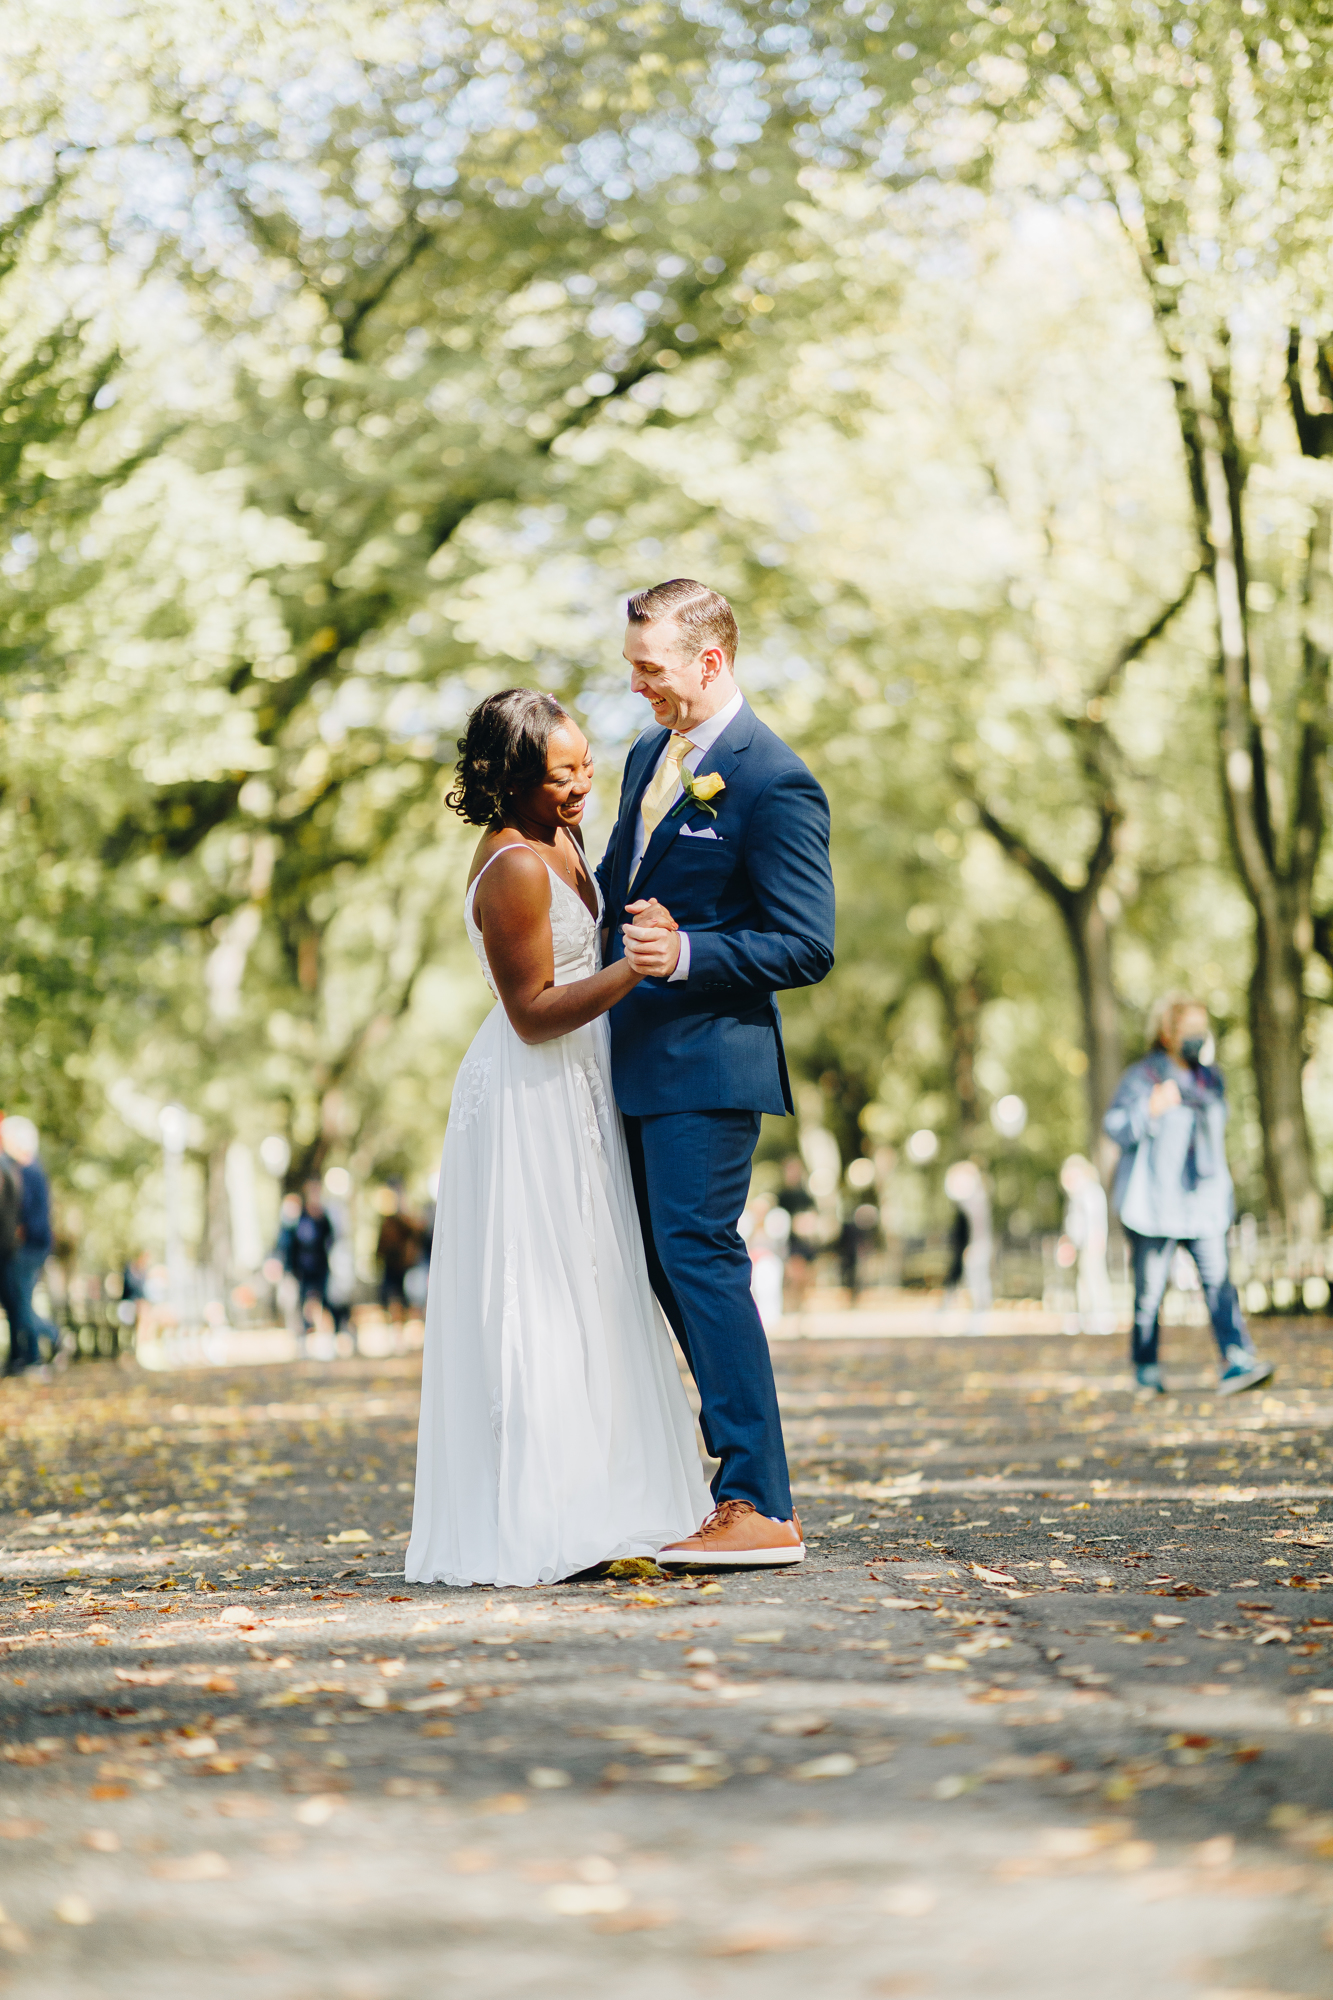 Fall Central Park Elopement Photos in New York